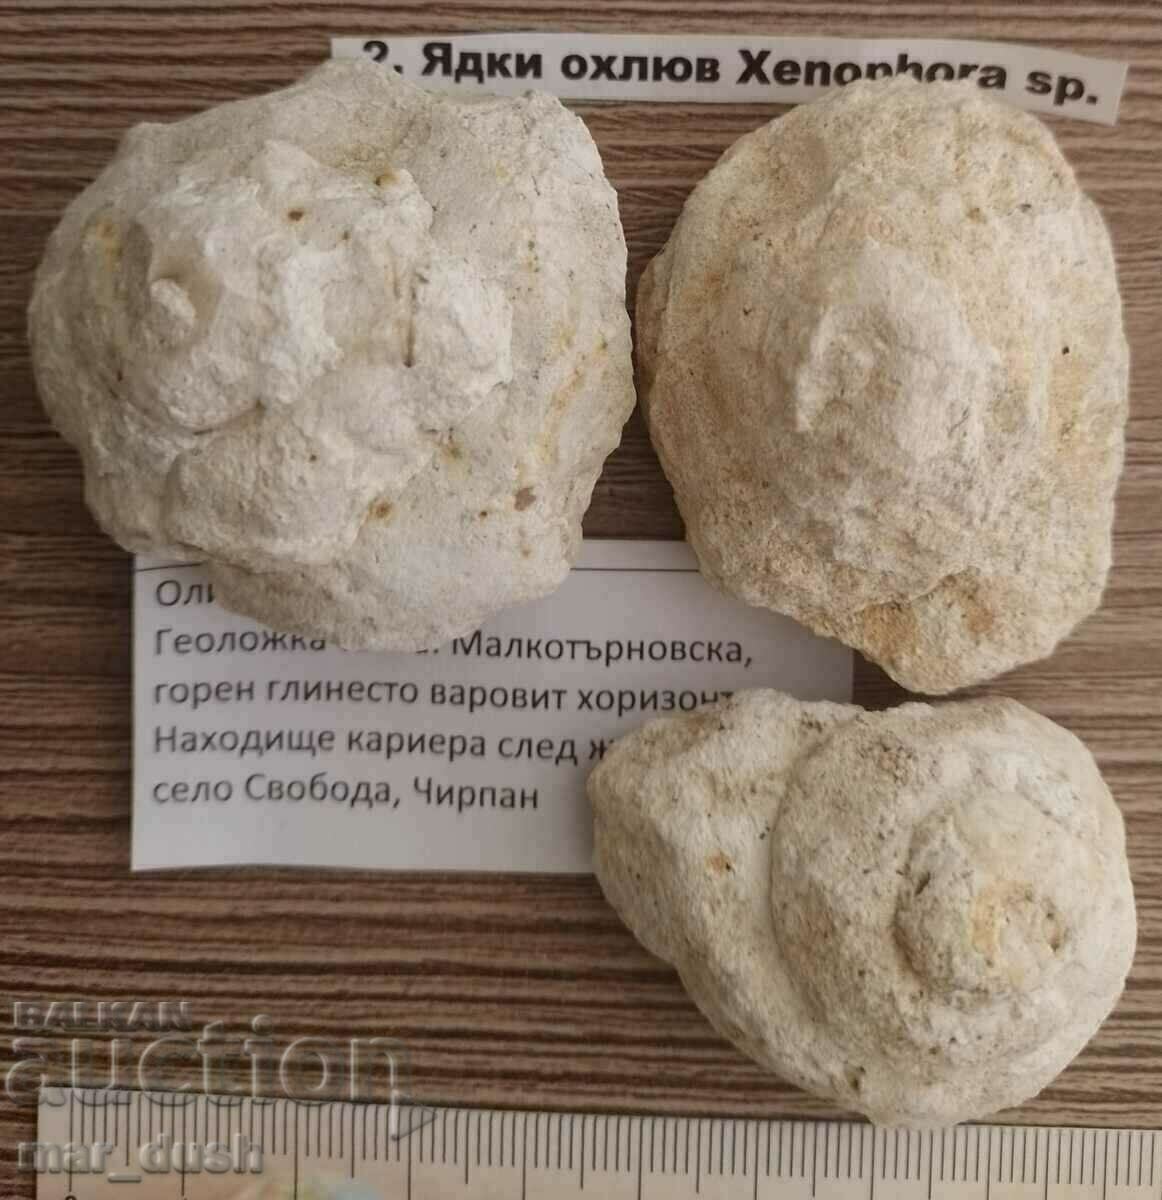 Fossil snails from Bulgaria